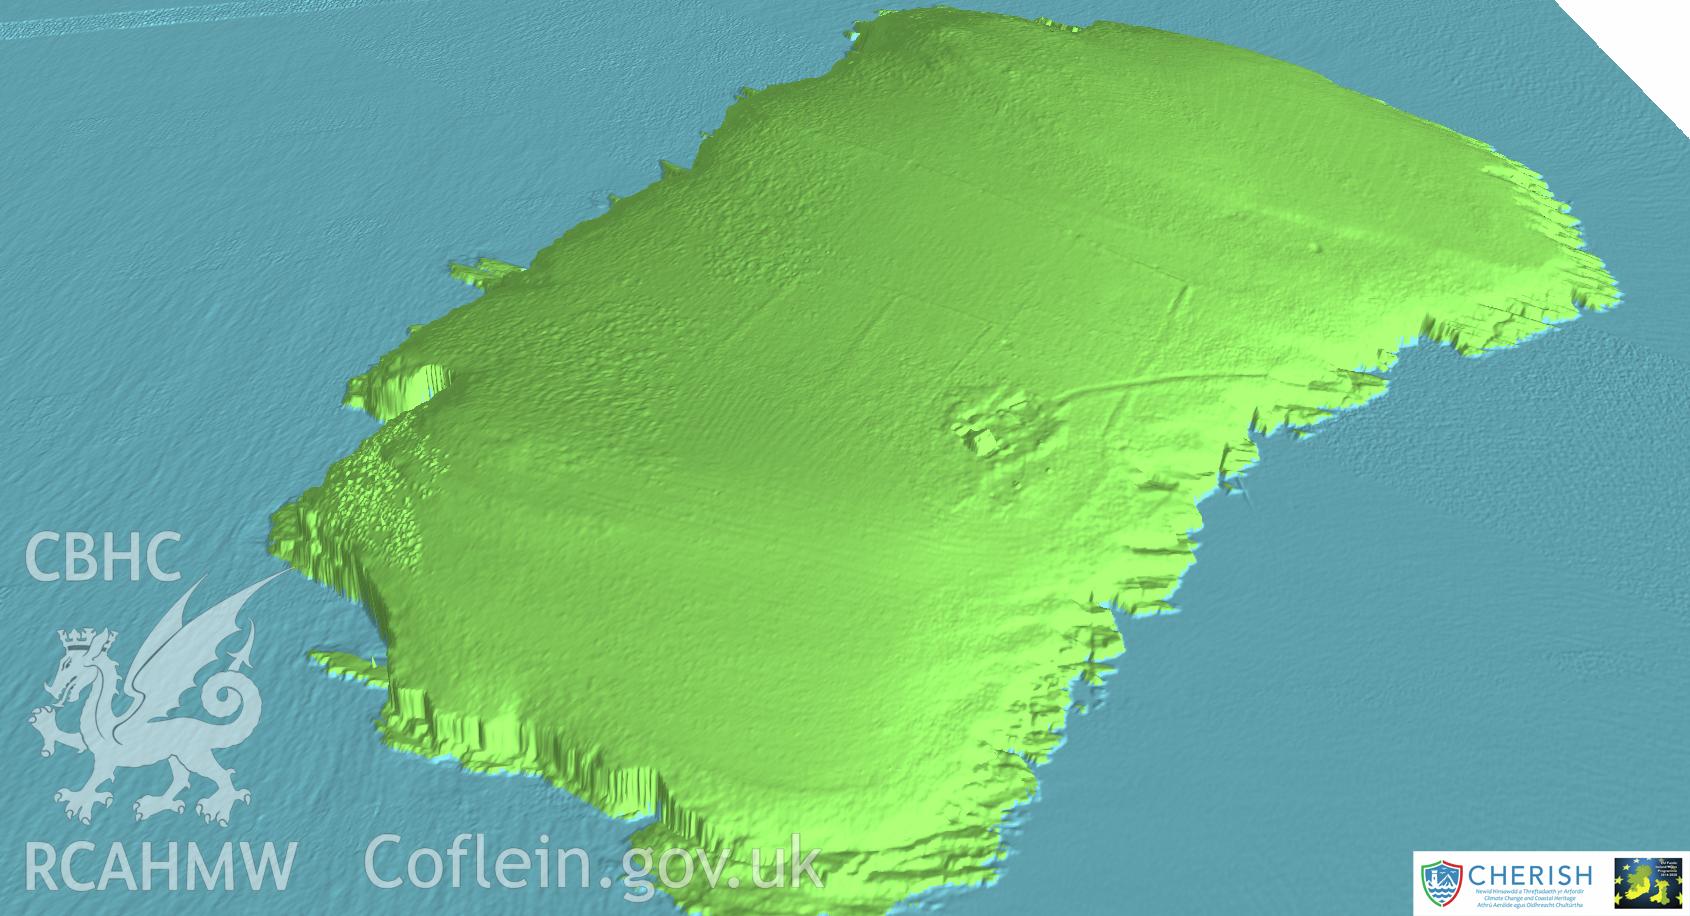 Ynysoedd Tudwal (St. Tudwal?s Islands). Airborne laser scanning (LiDAR) commissioned by the CHERISH Project 2017-2021, flown by Bluesky International LTD at low tide on 24th February 2017. View showing the east island facing north.